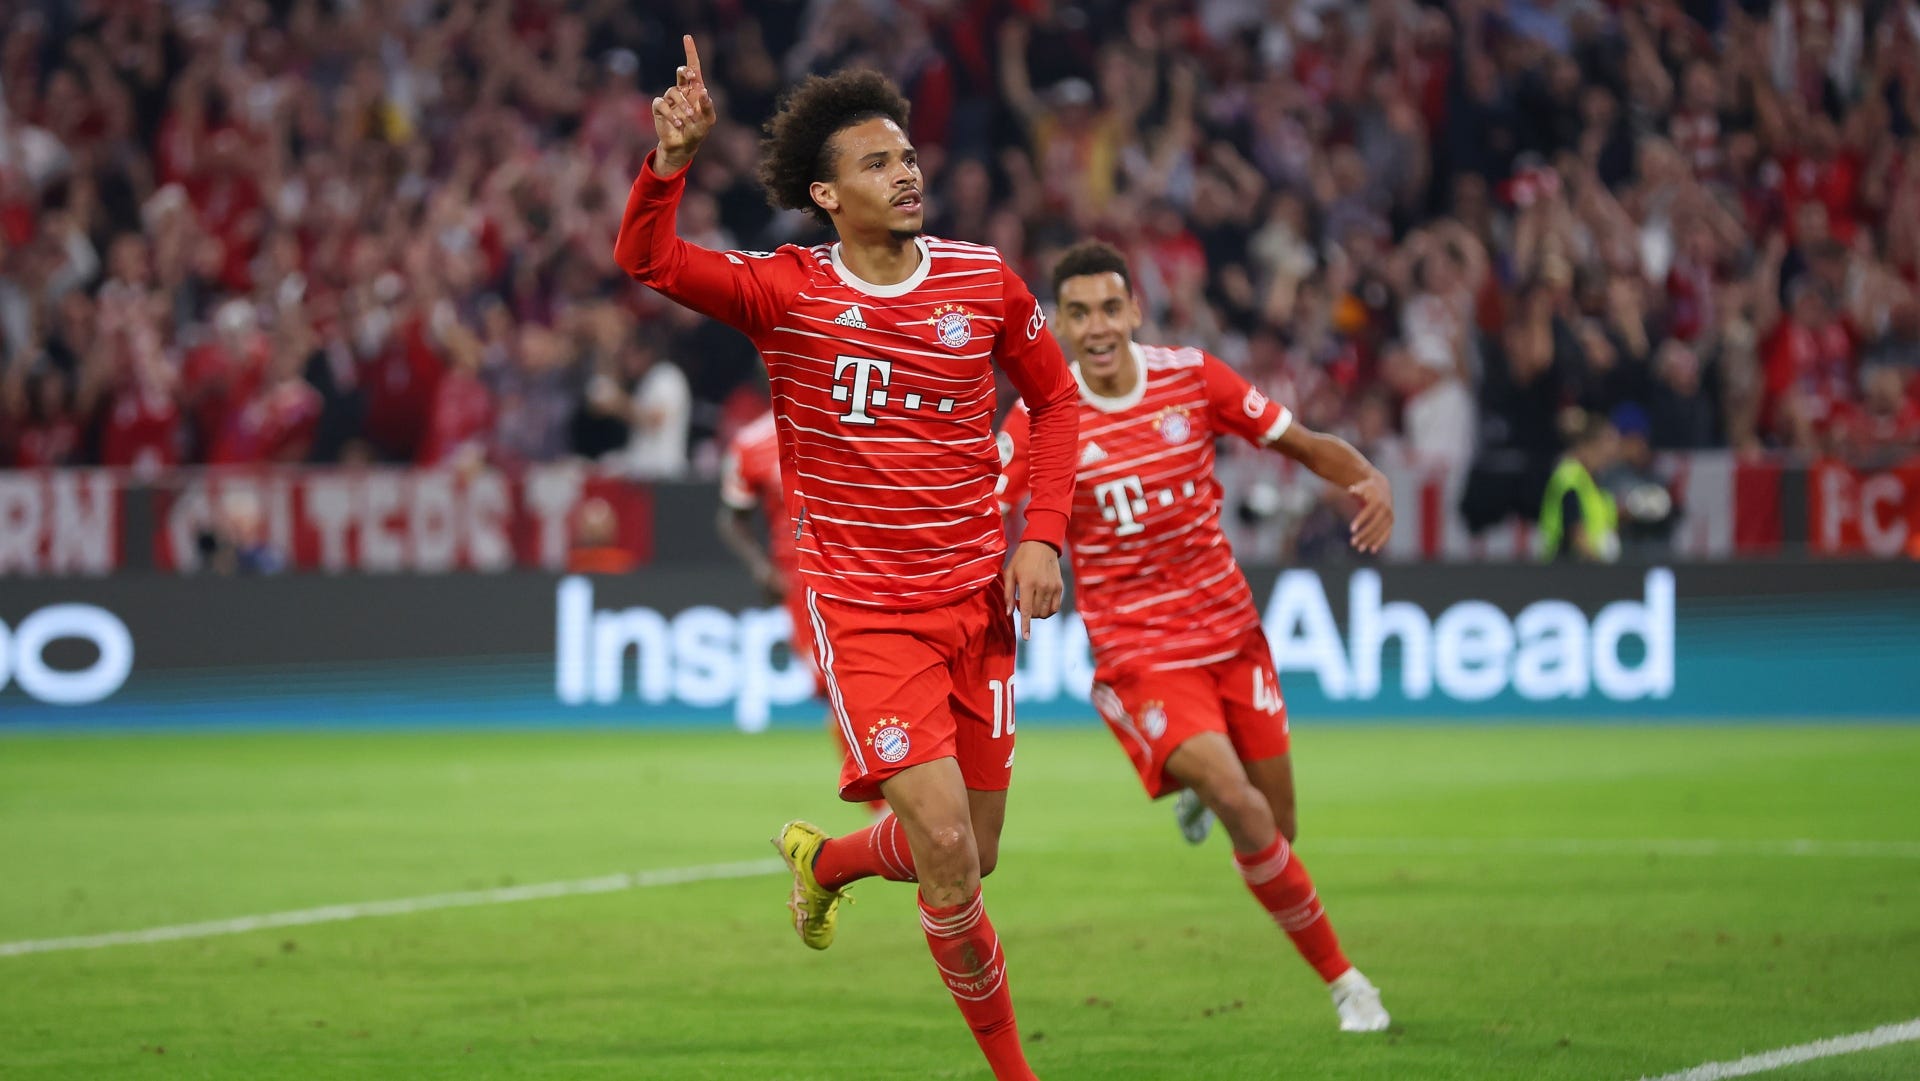 Bayern Munich vs Bayer Leverkusen Live stream, TV channel, kick-off time and where to watch Goal